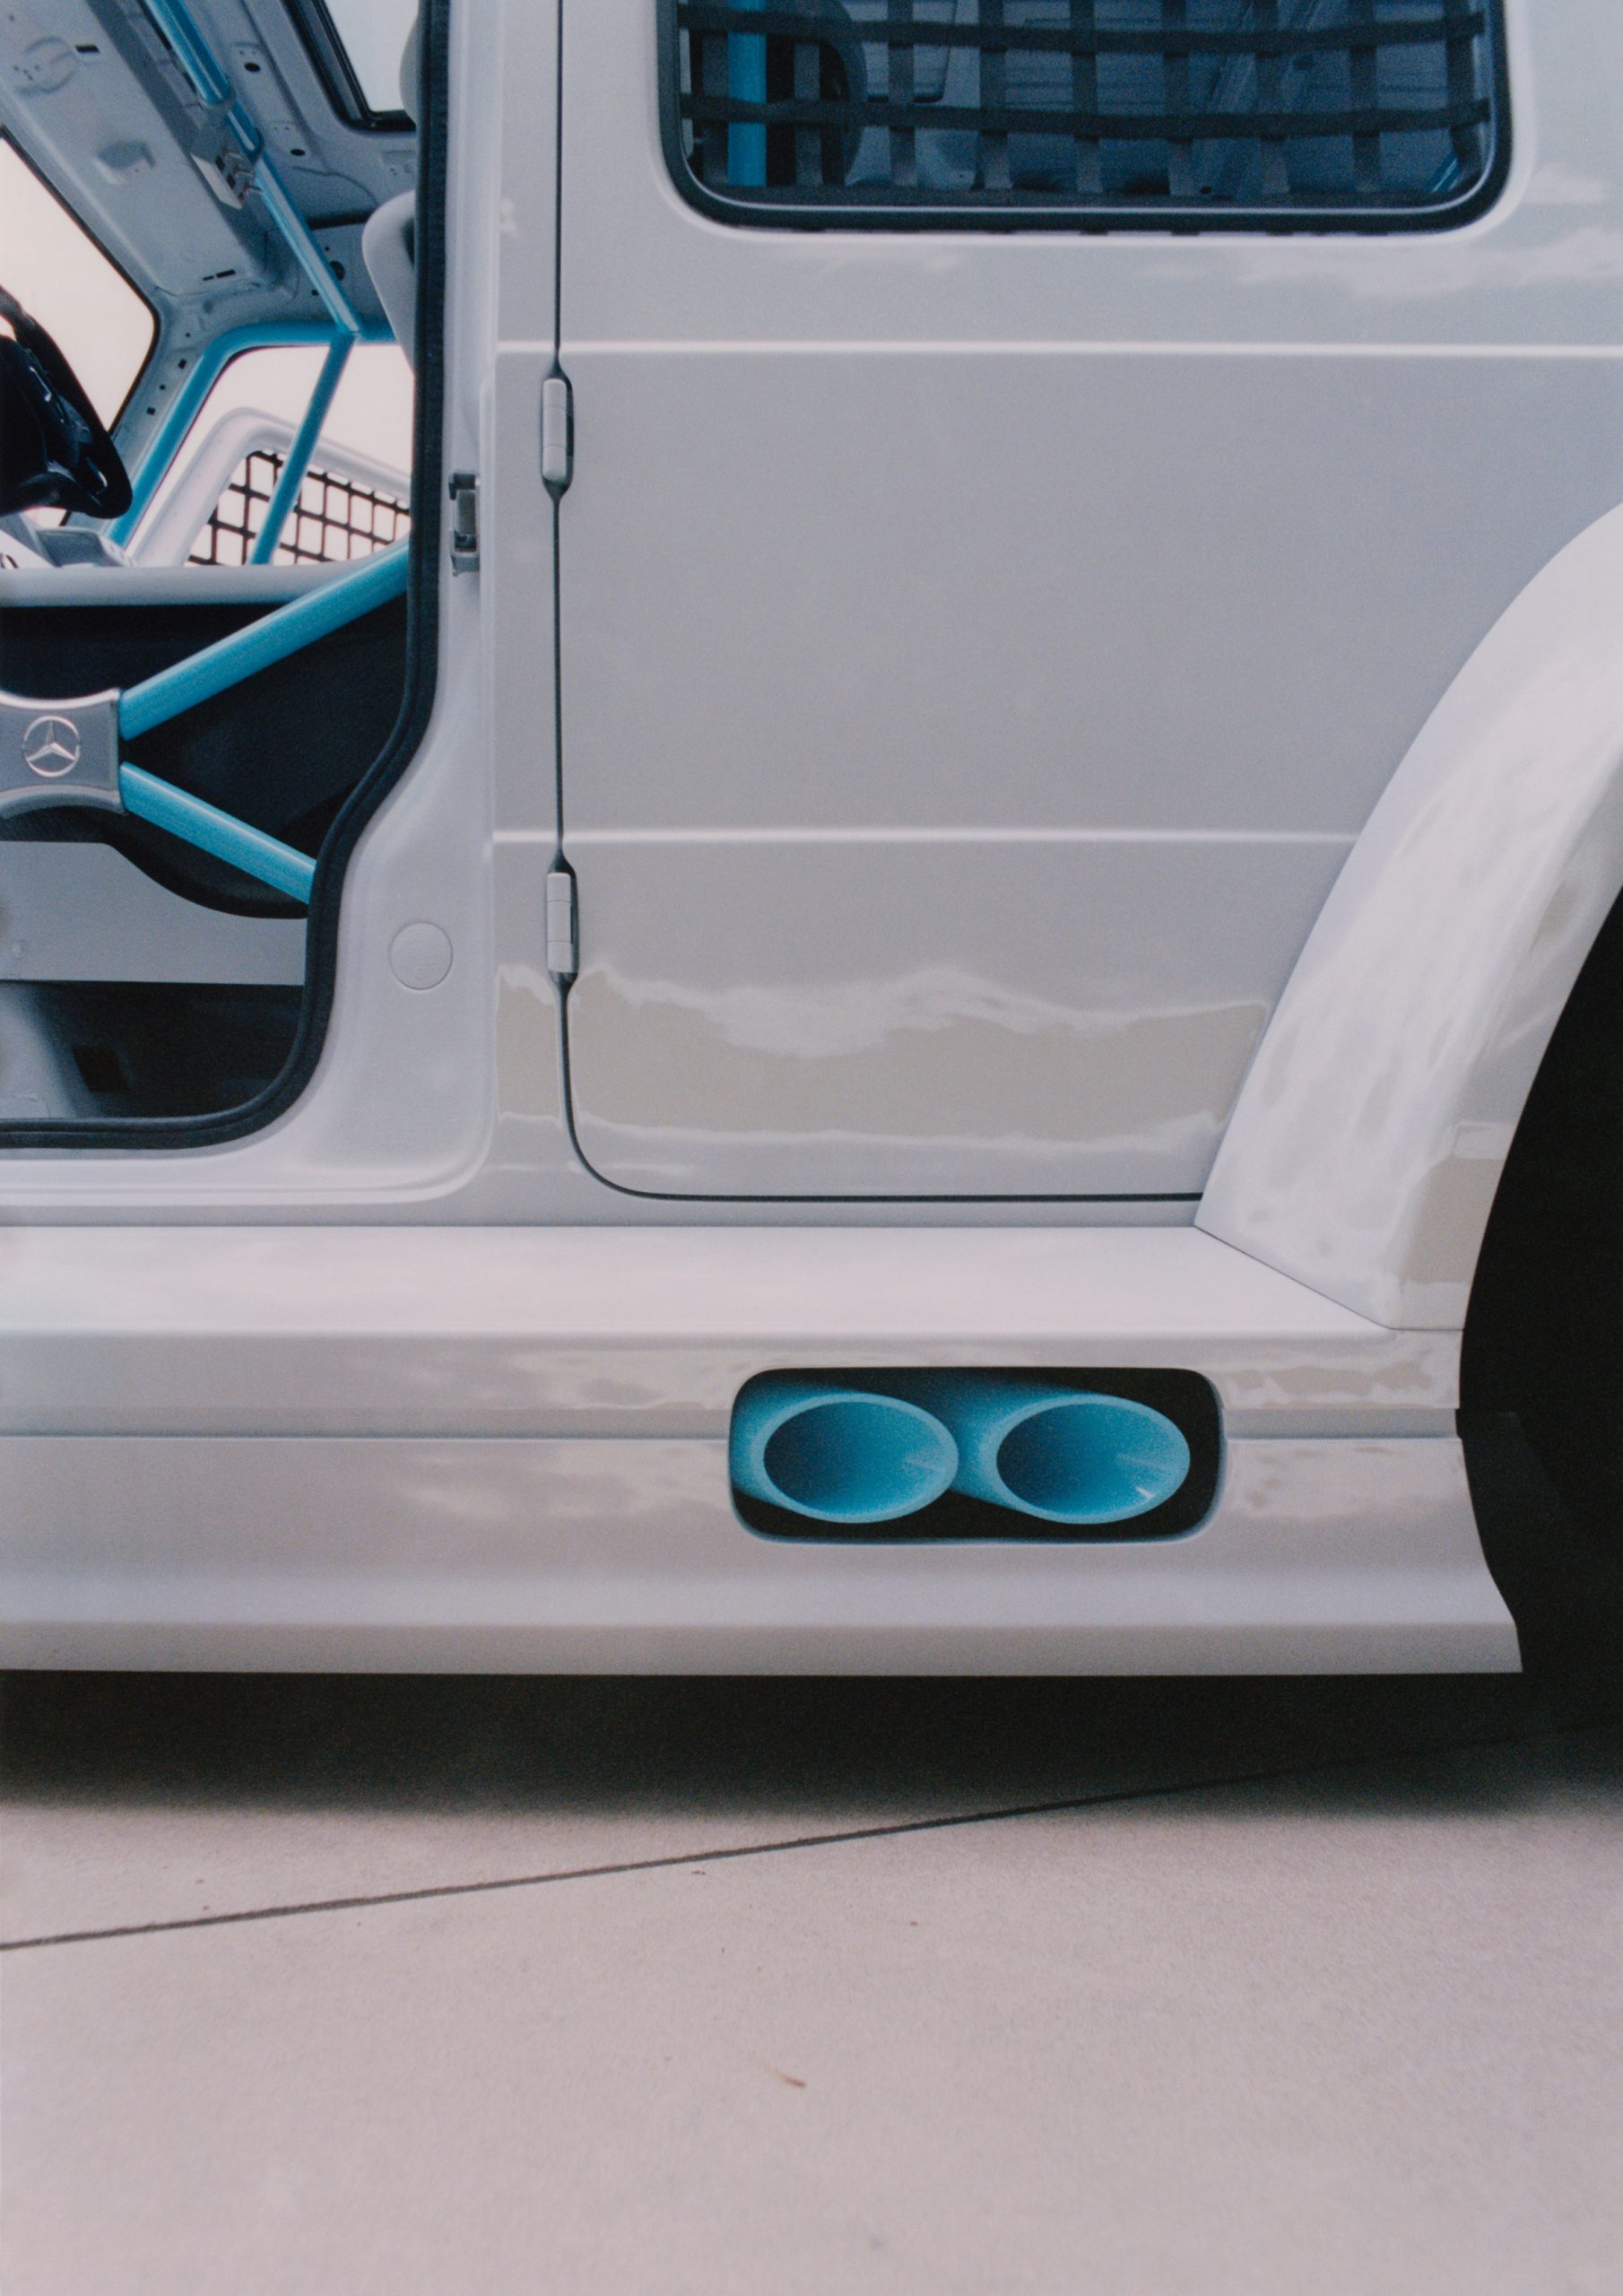 Blue exhaust pipes in Project Geländewagen car by Virgil Abloh and Mercedes Benz